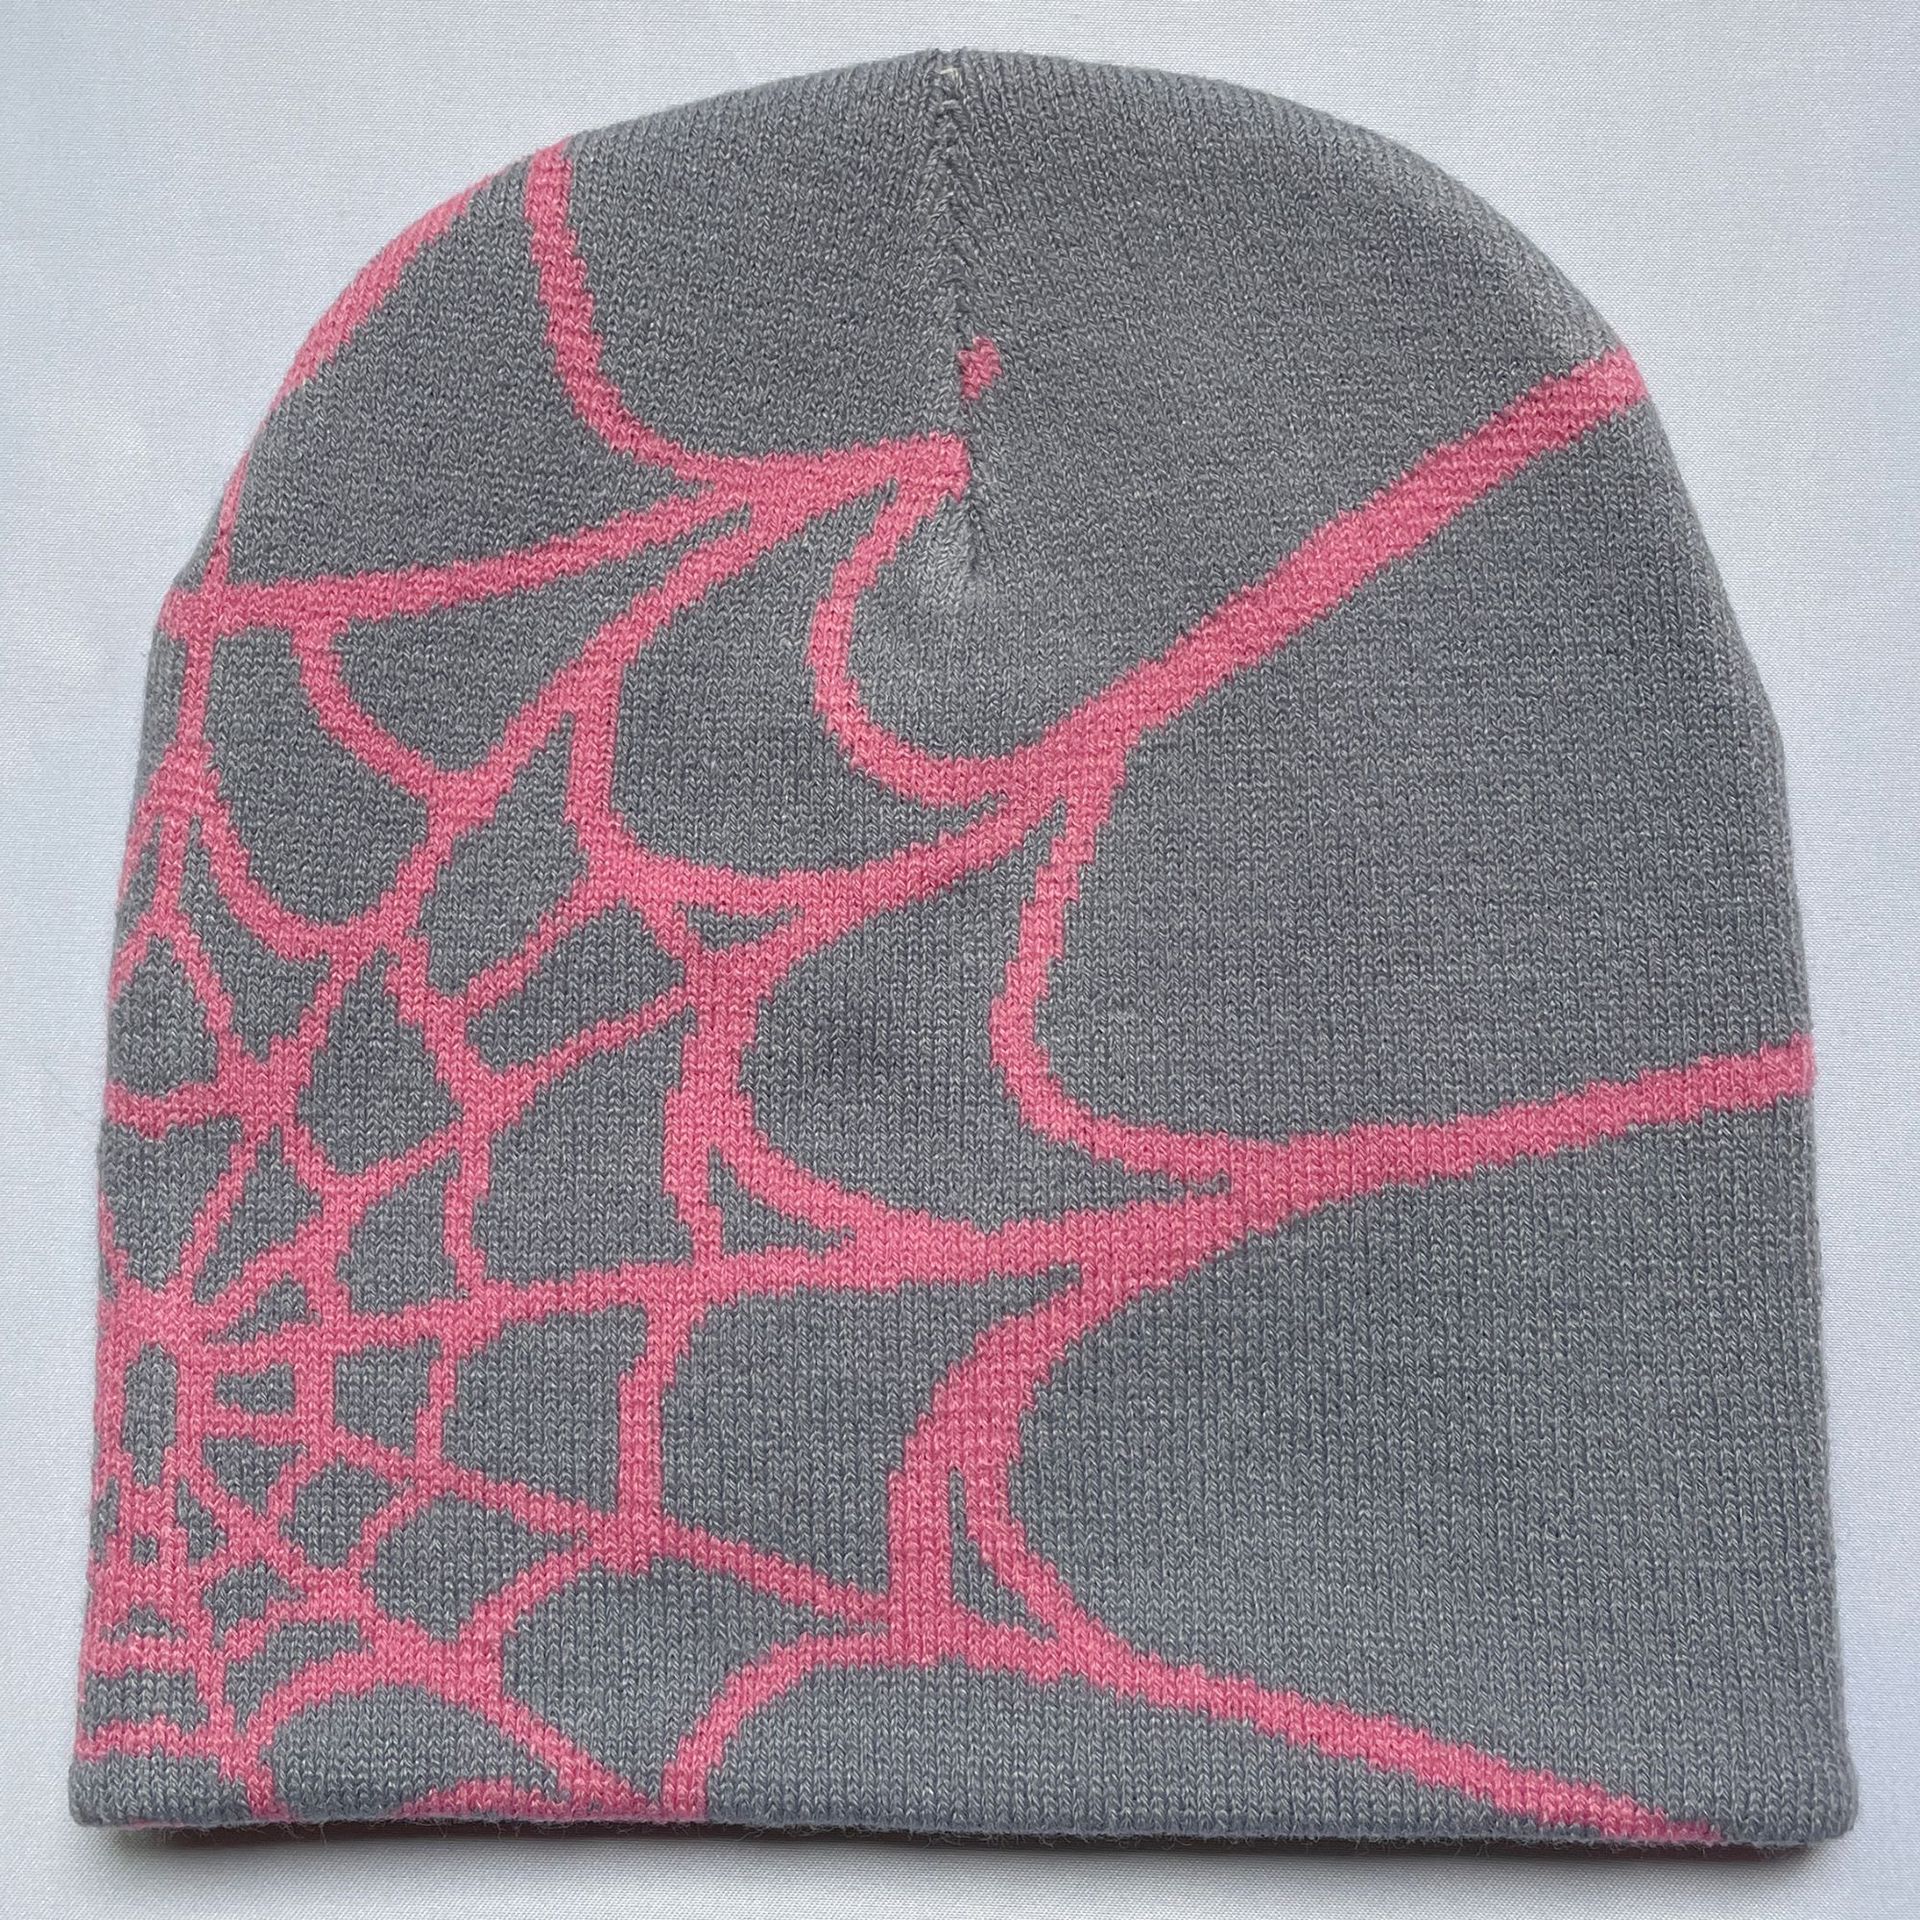 Wholesale Fashion Outdoor Riding Spider Web Jacquard Knitted Hat